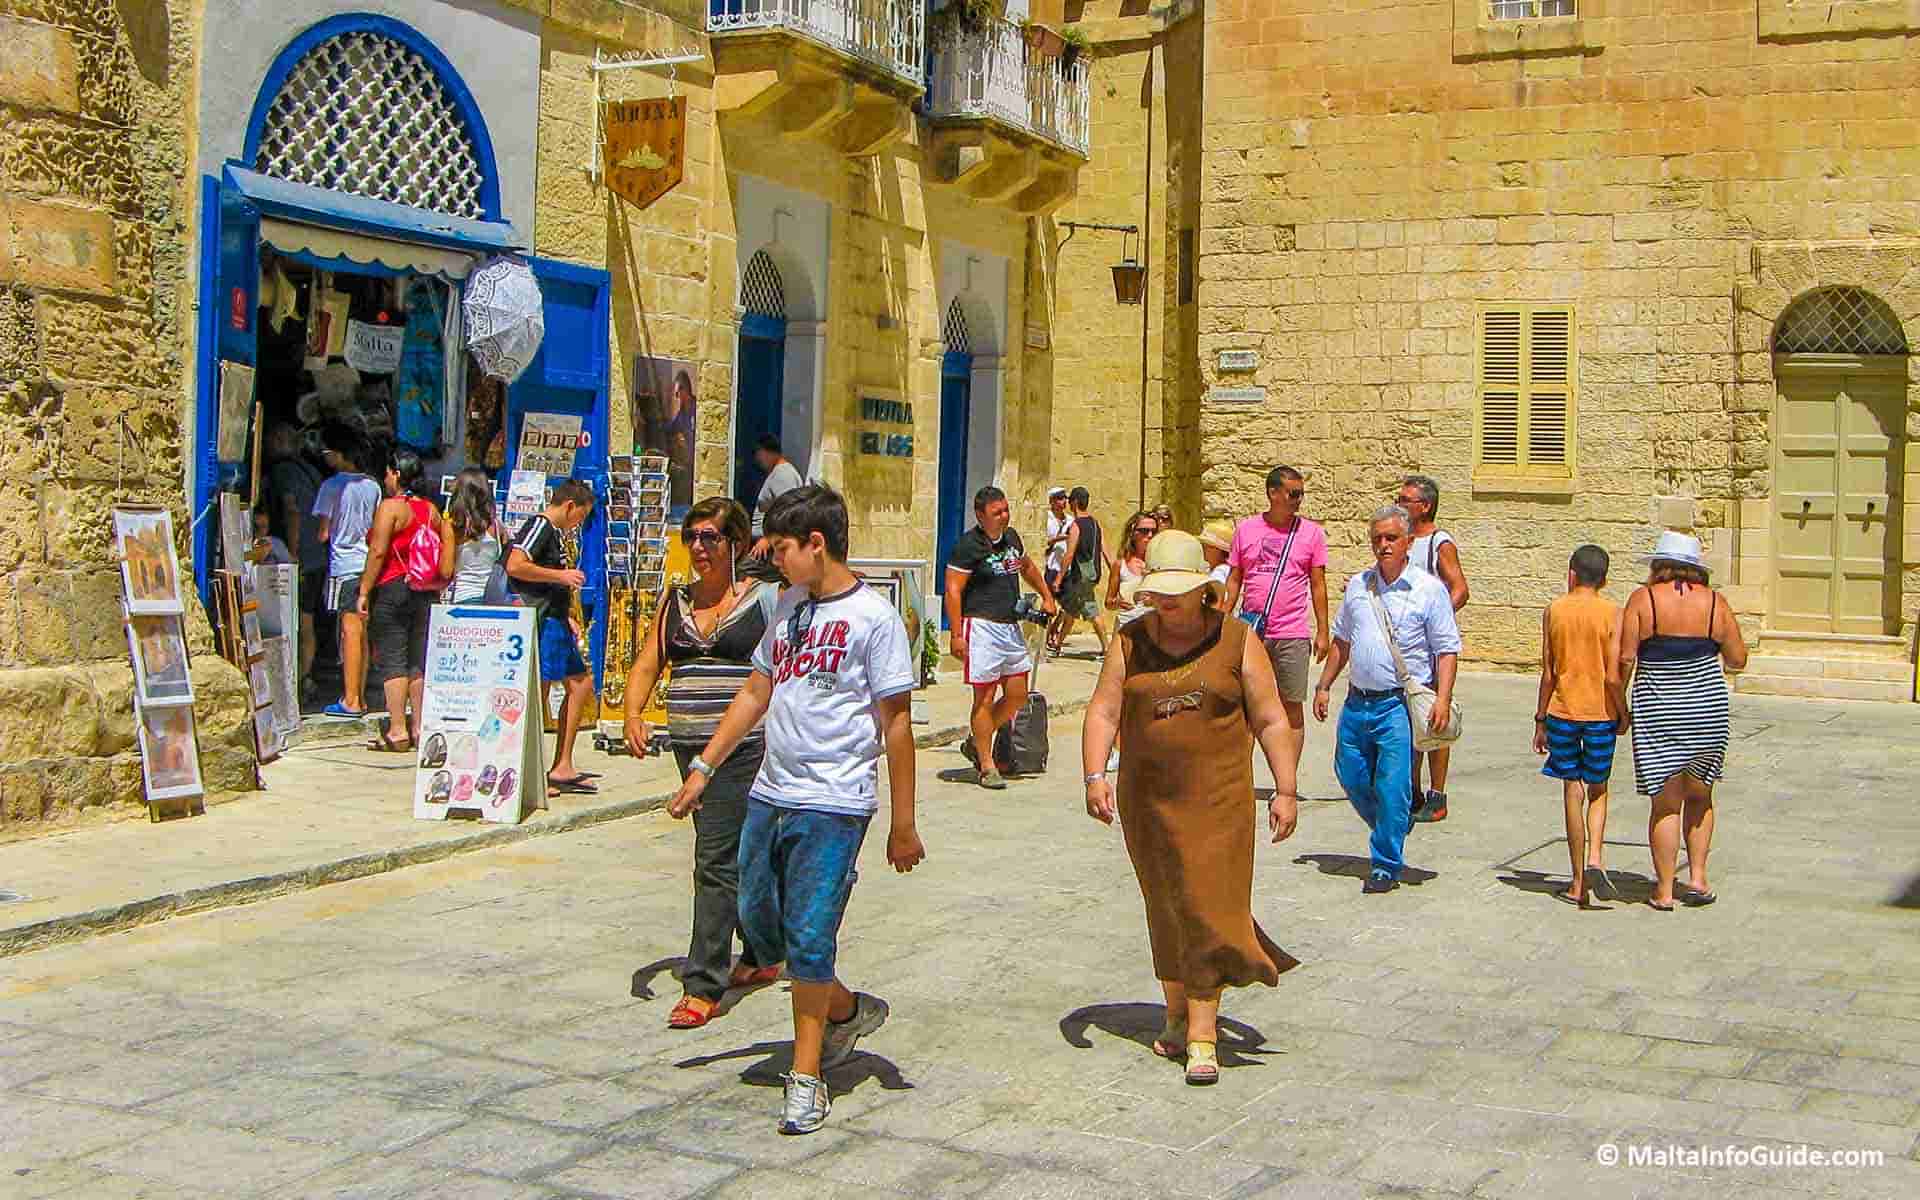 People walking by the Mdina glass shop.